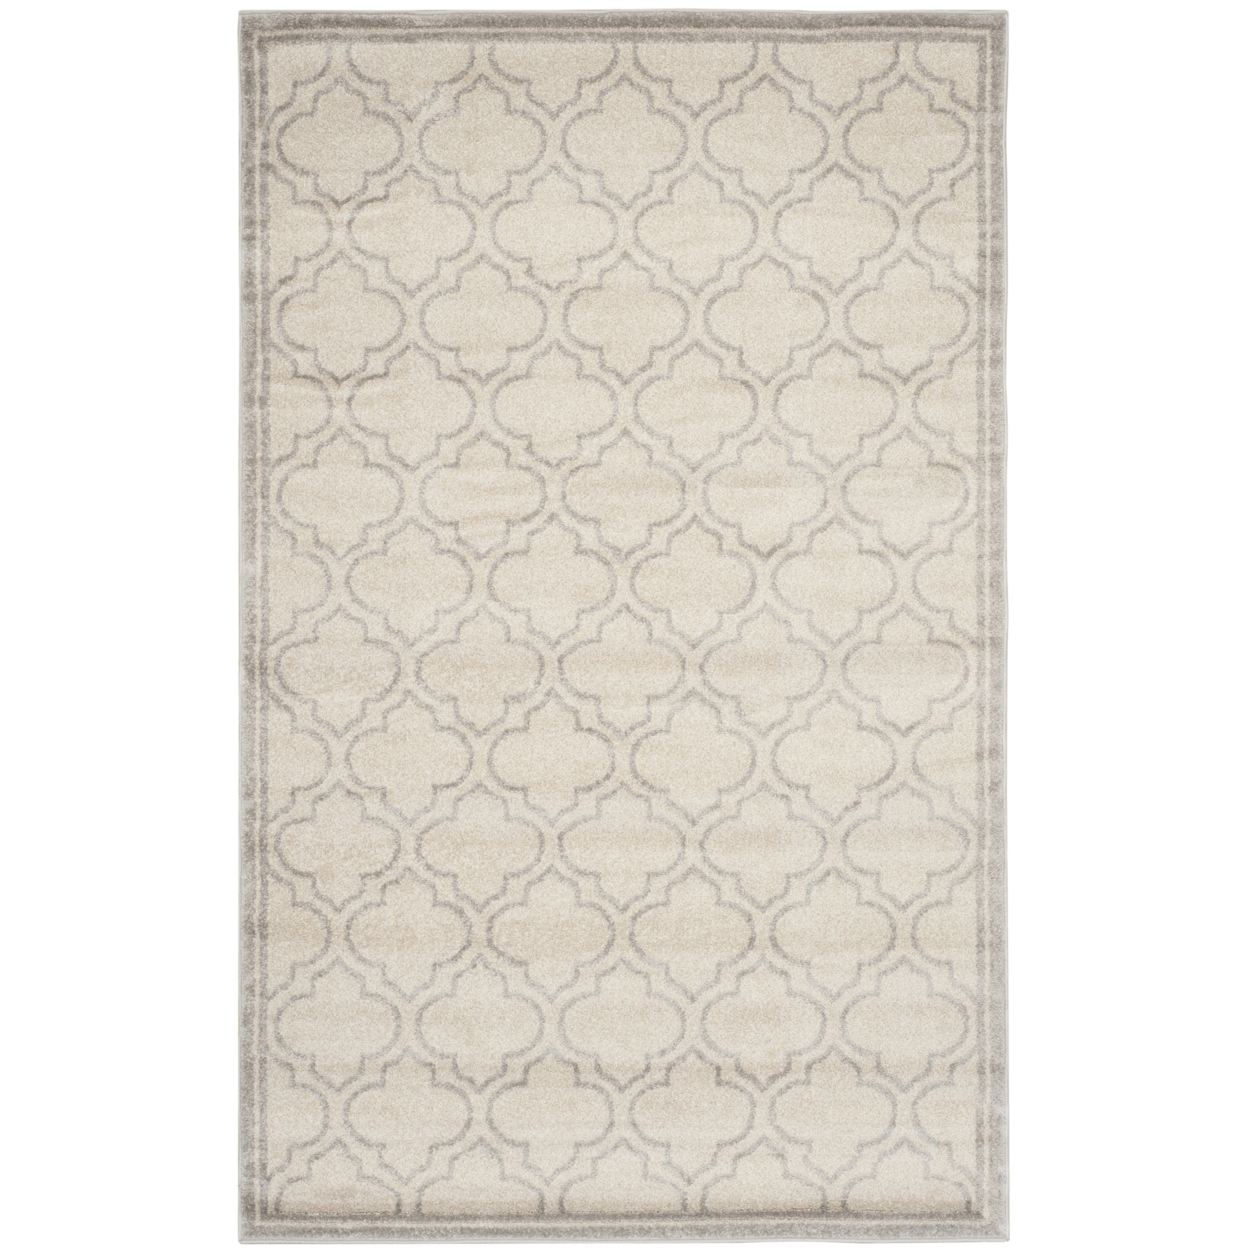 SAFAVIEH Amherst Collection AMT412E Ivory/Light Grey Rug - 5' 3 X 8'